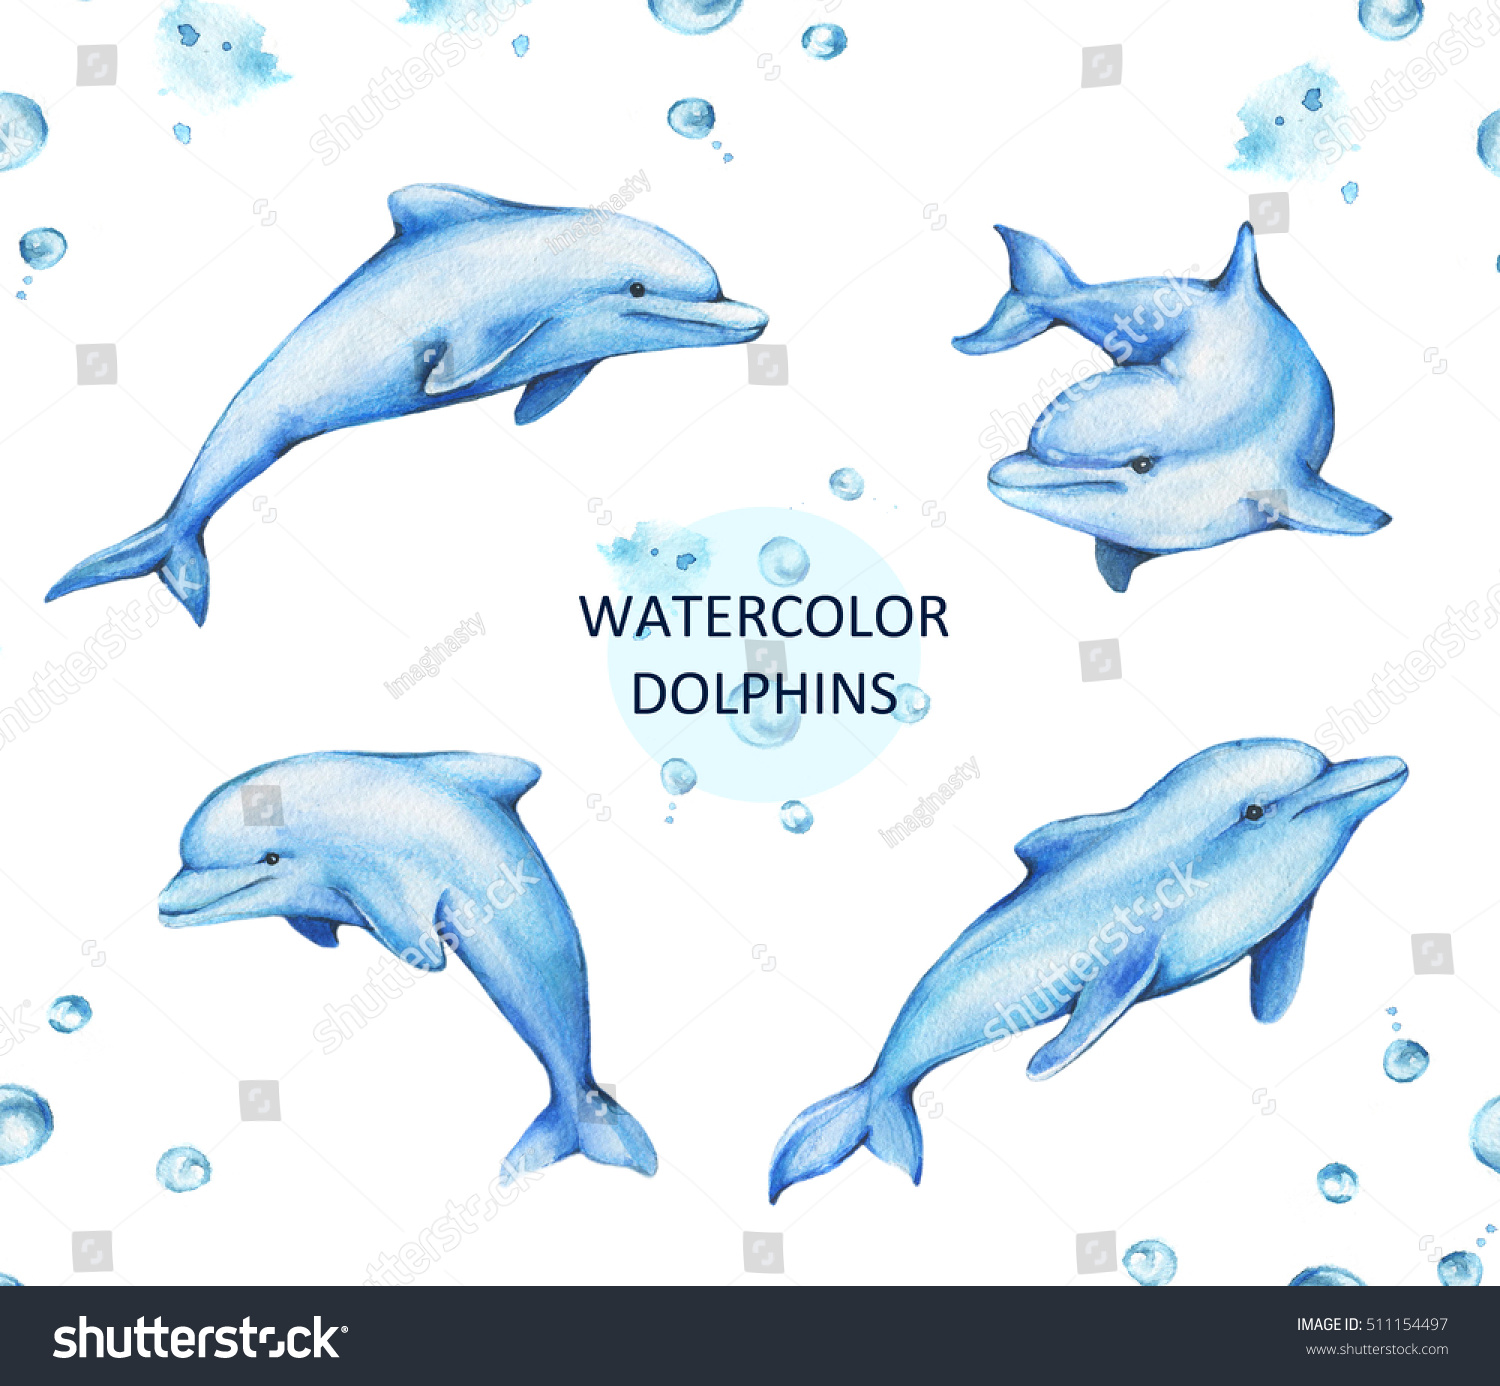 Hand Drawn Watercolor Illustration Dolphins Isolated Stock Illustration